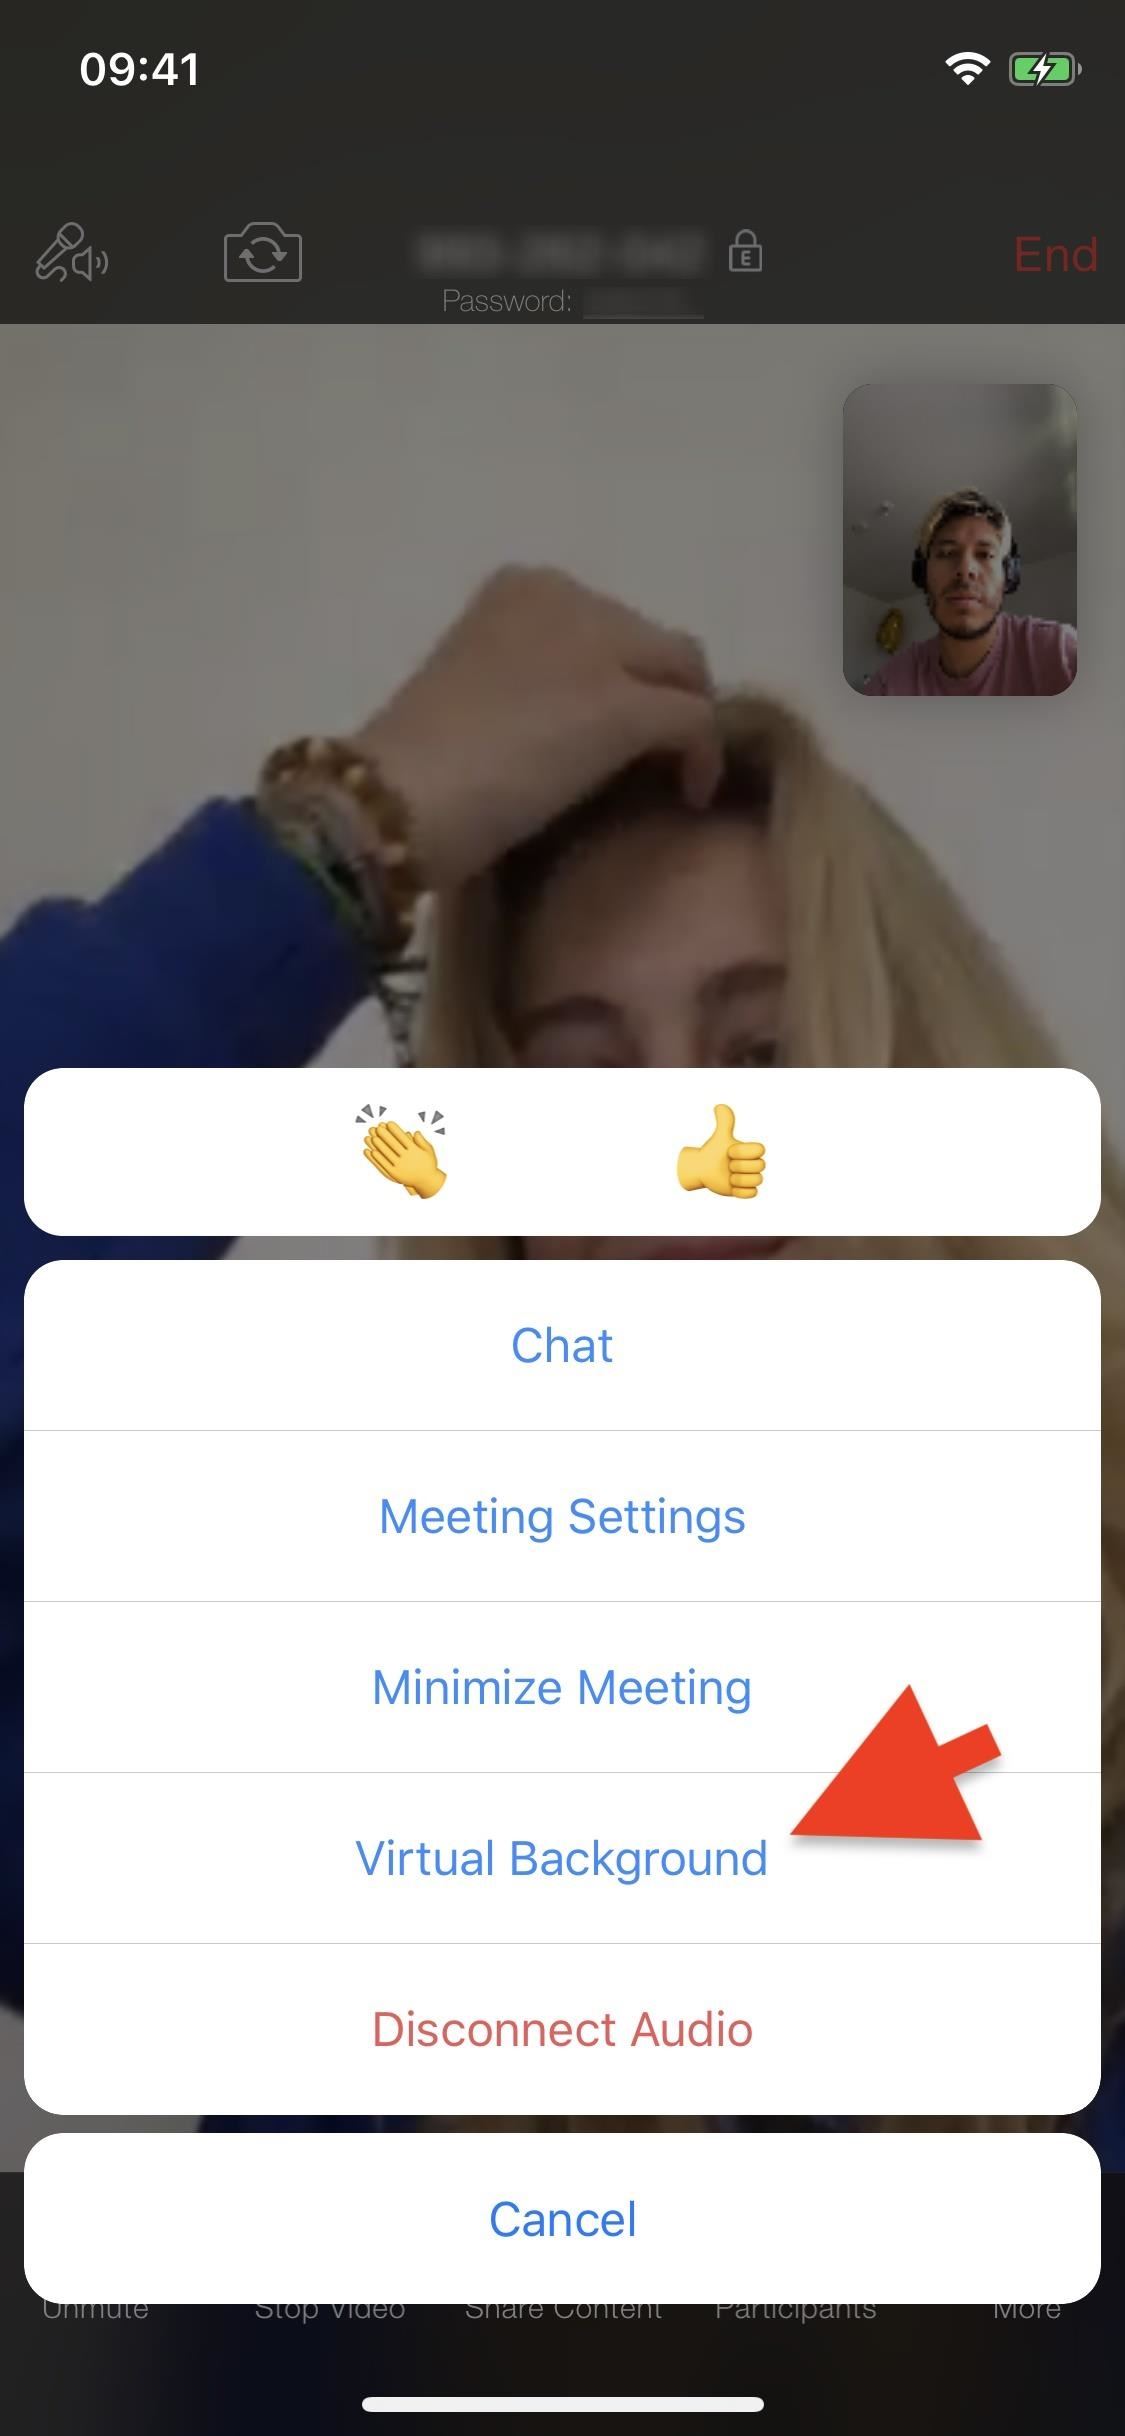 Use This Zoom Hack to Make Everyone Think You're Still in the Video Meeting When You're Not